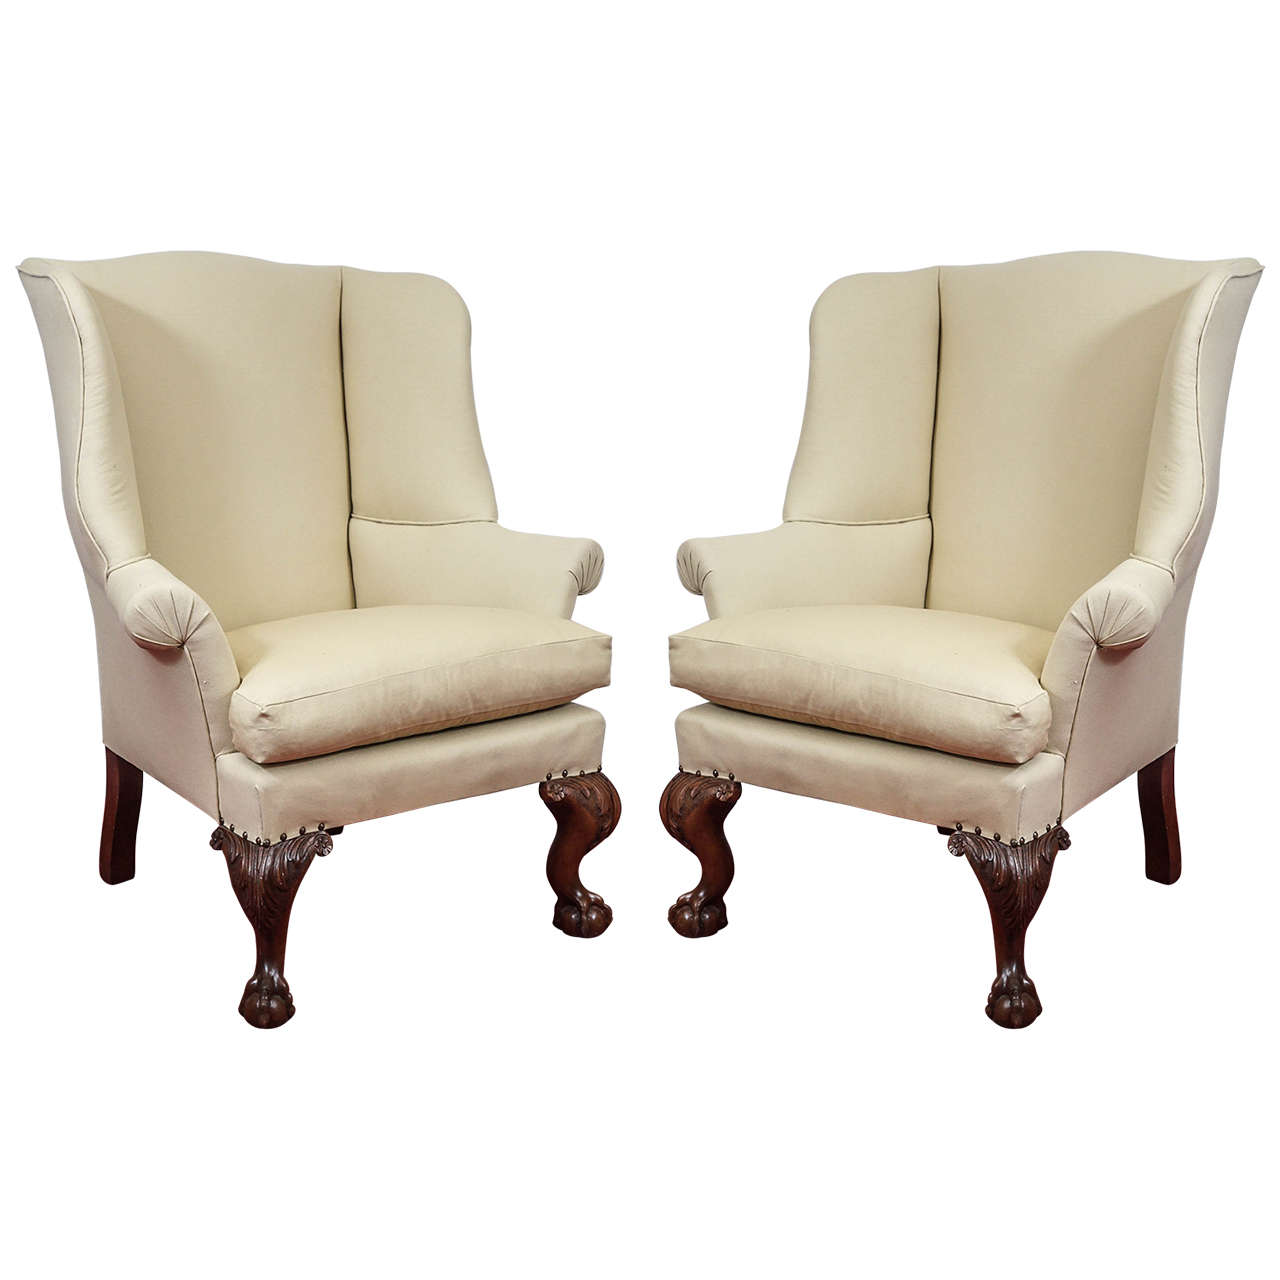 Pair of George II Wingback Chairs